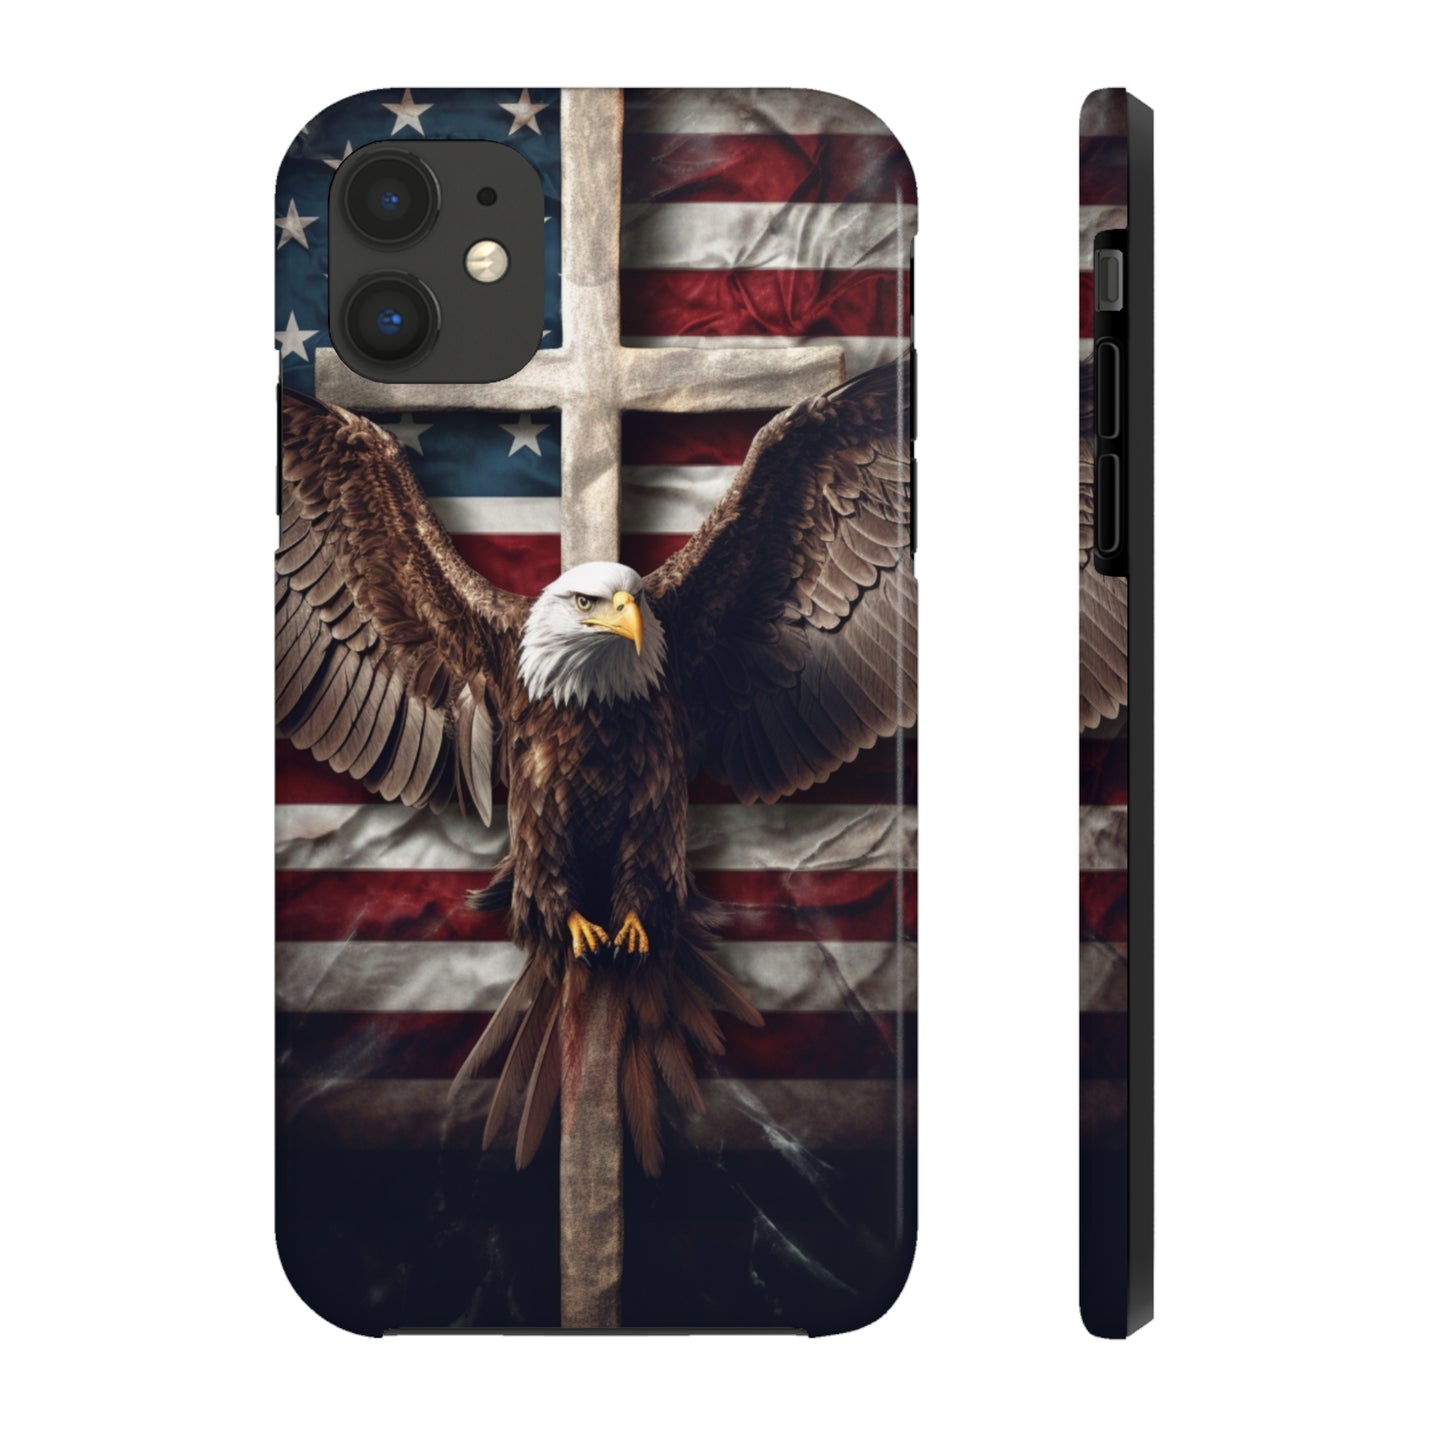 Stars and Stripes Collections - Soaring High